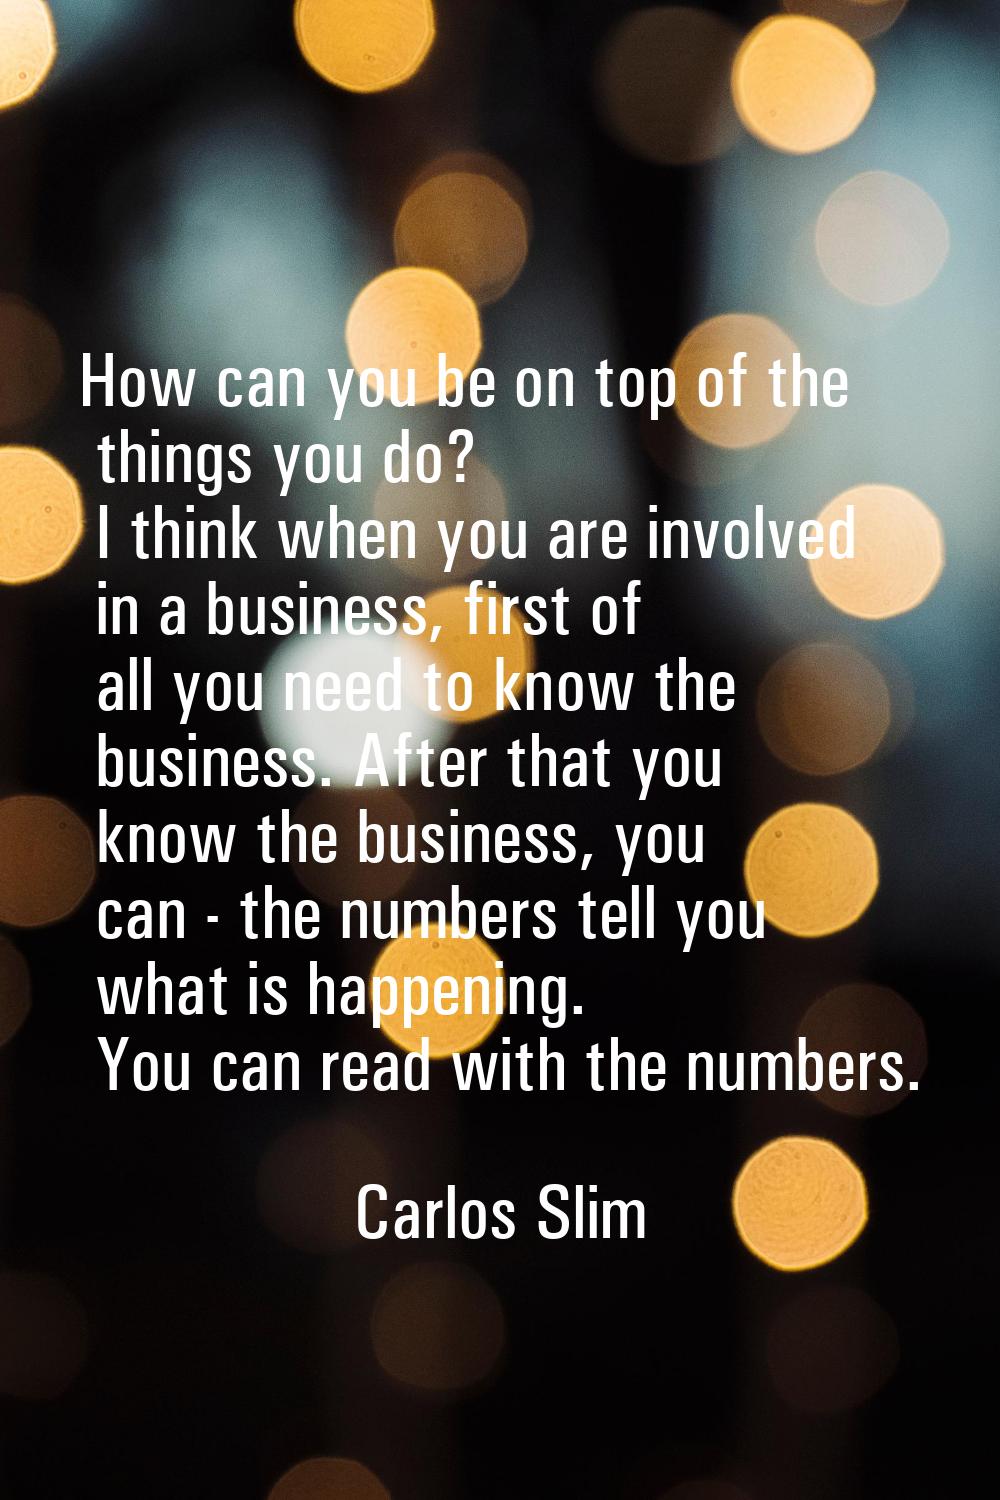 How can you be on top of the things you do? I think when you are involved in a business, first of a